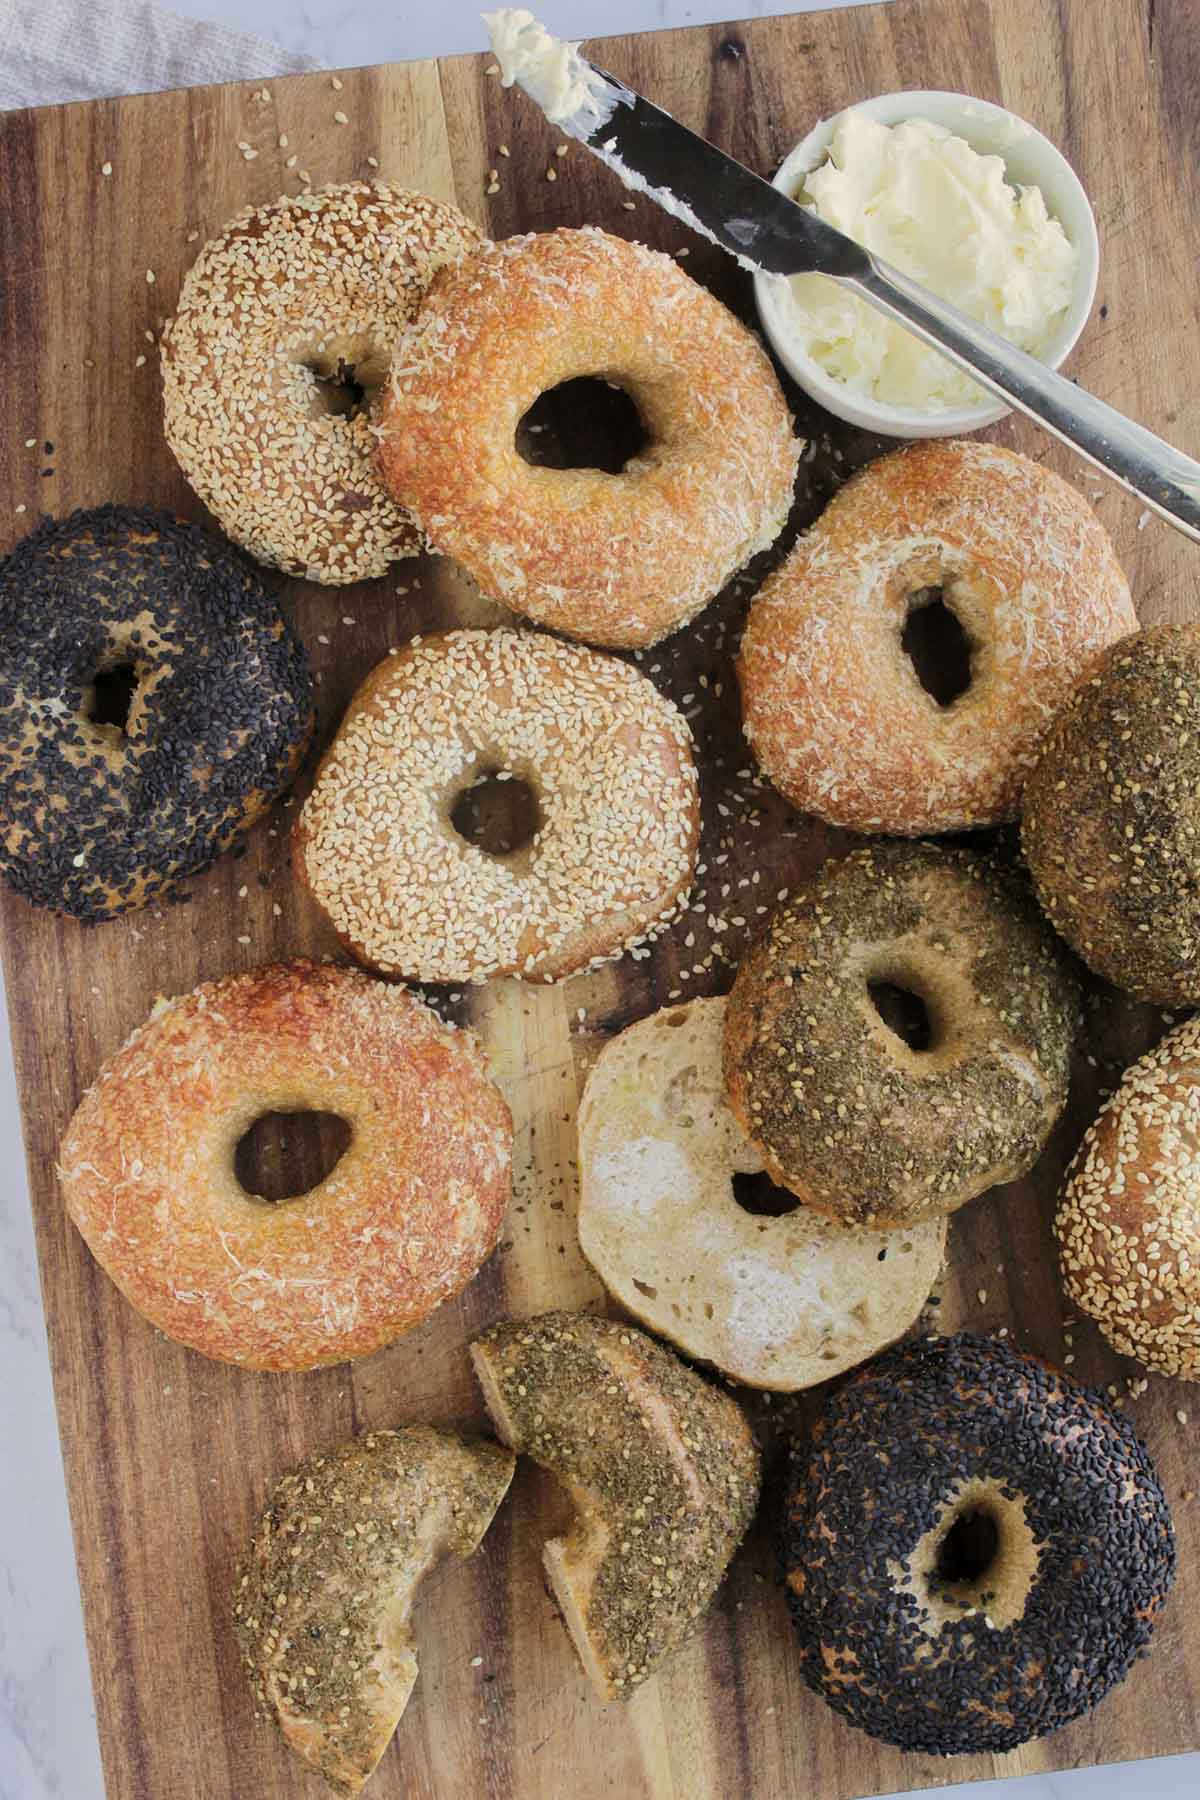 various flavored sourdough bagels on wooden cutting board.